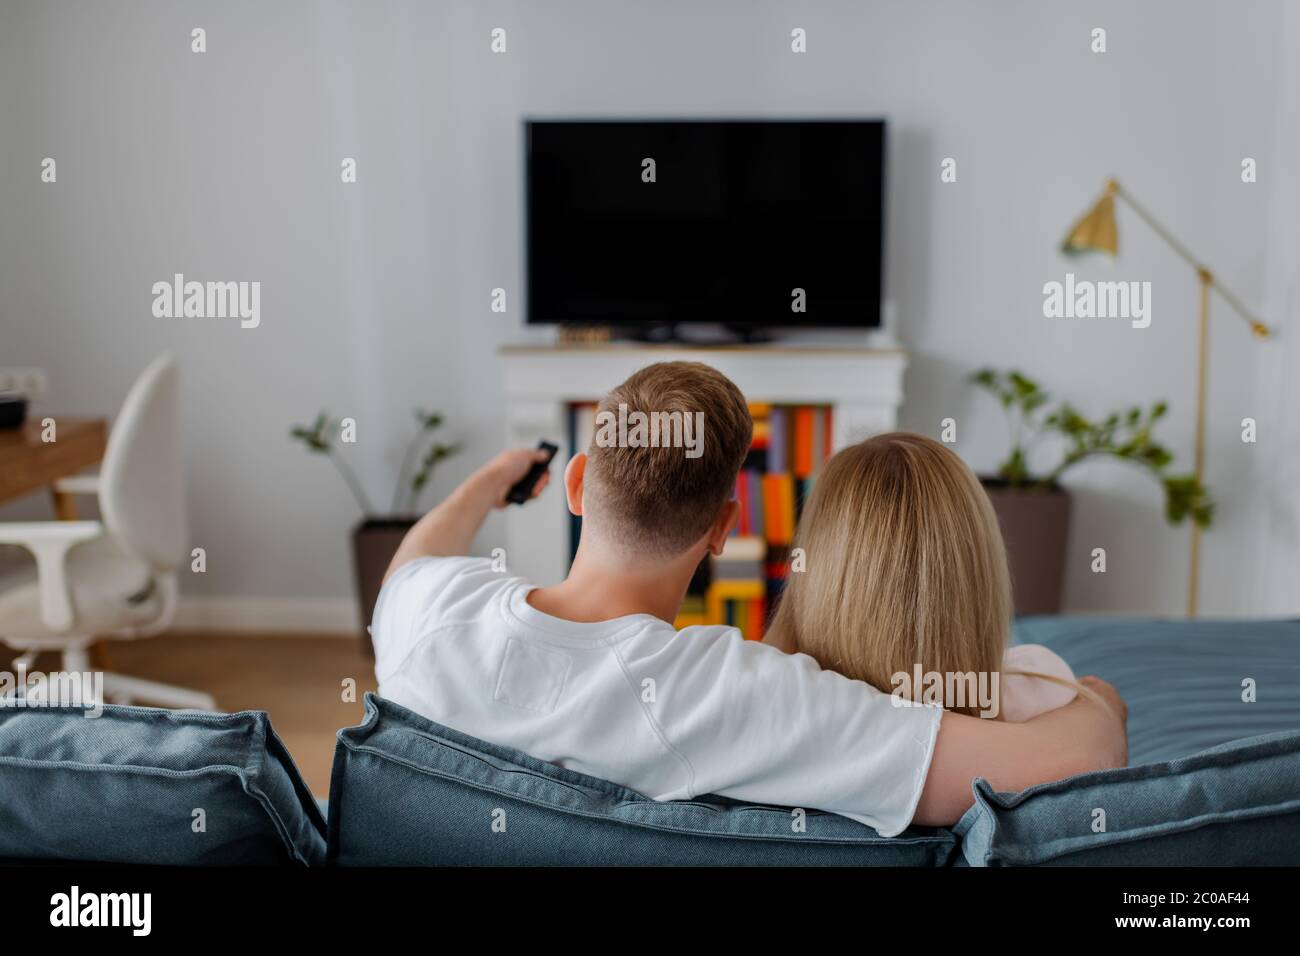 back view of man and woman sitting near flat panel tv with blank screen Stock Photo